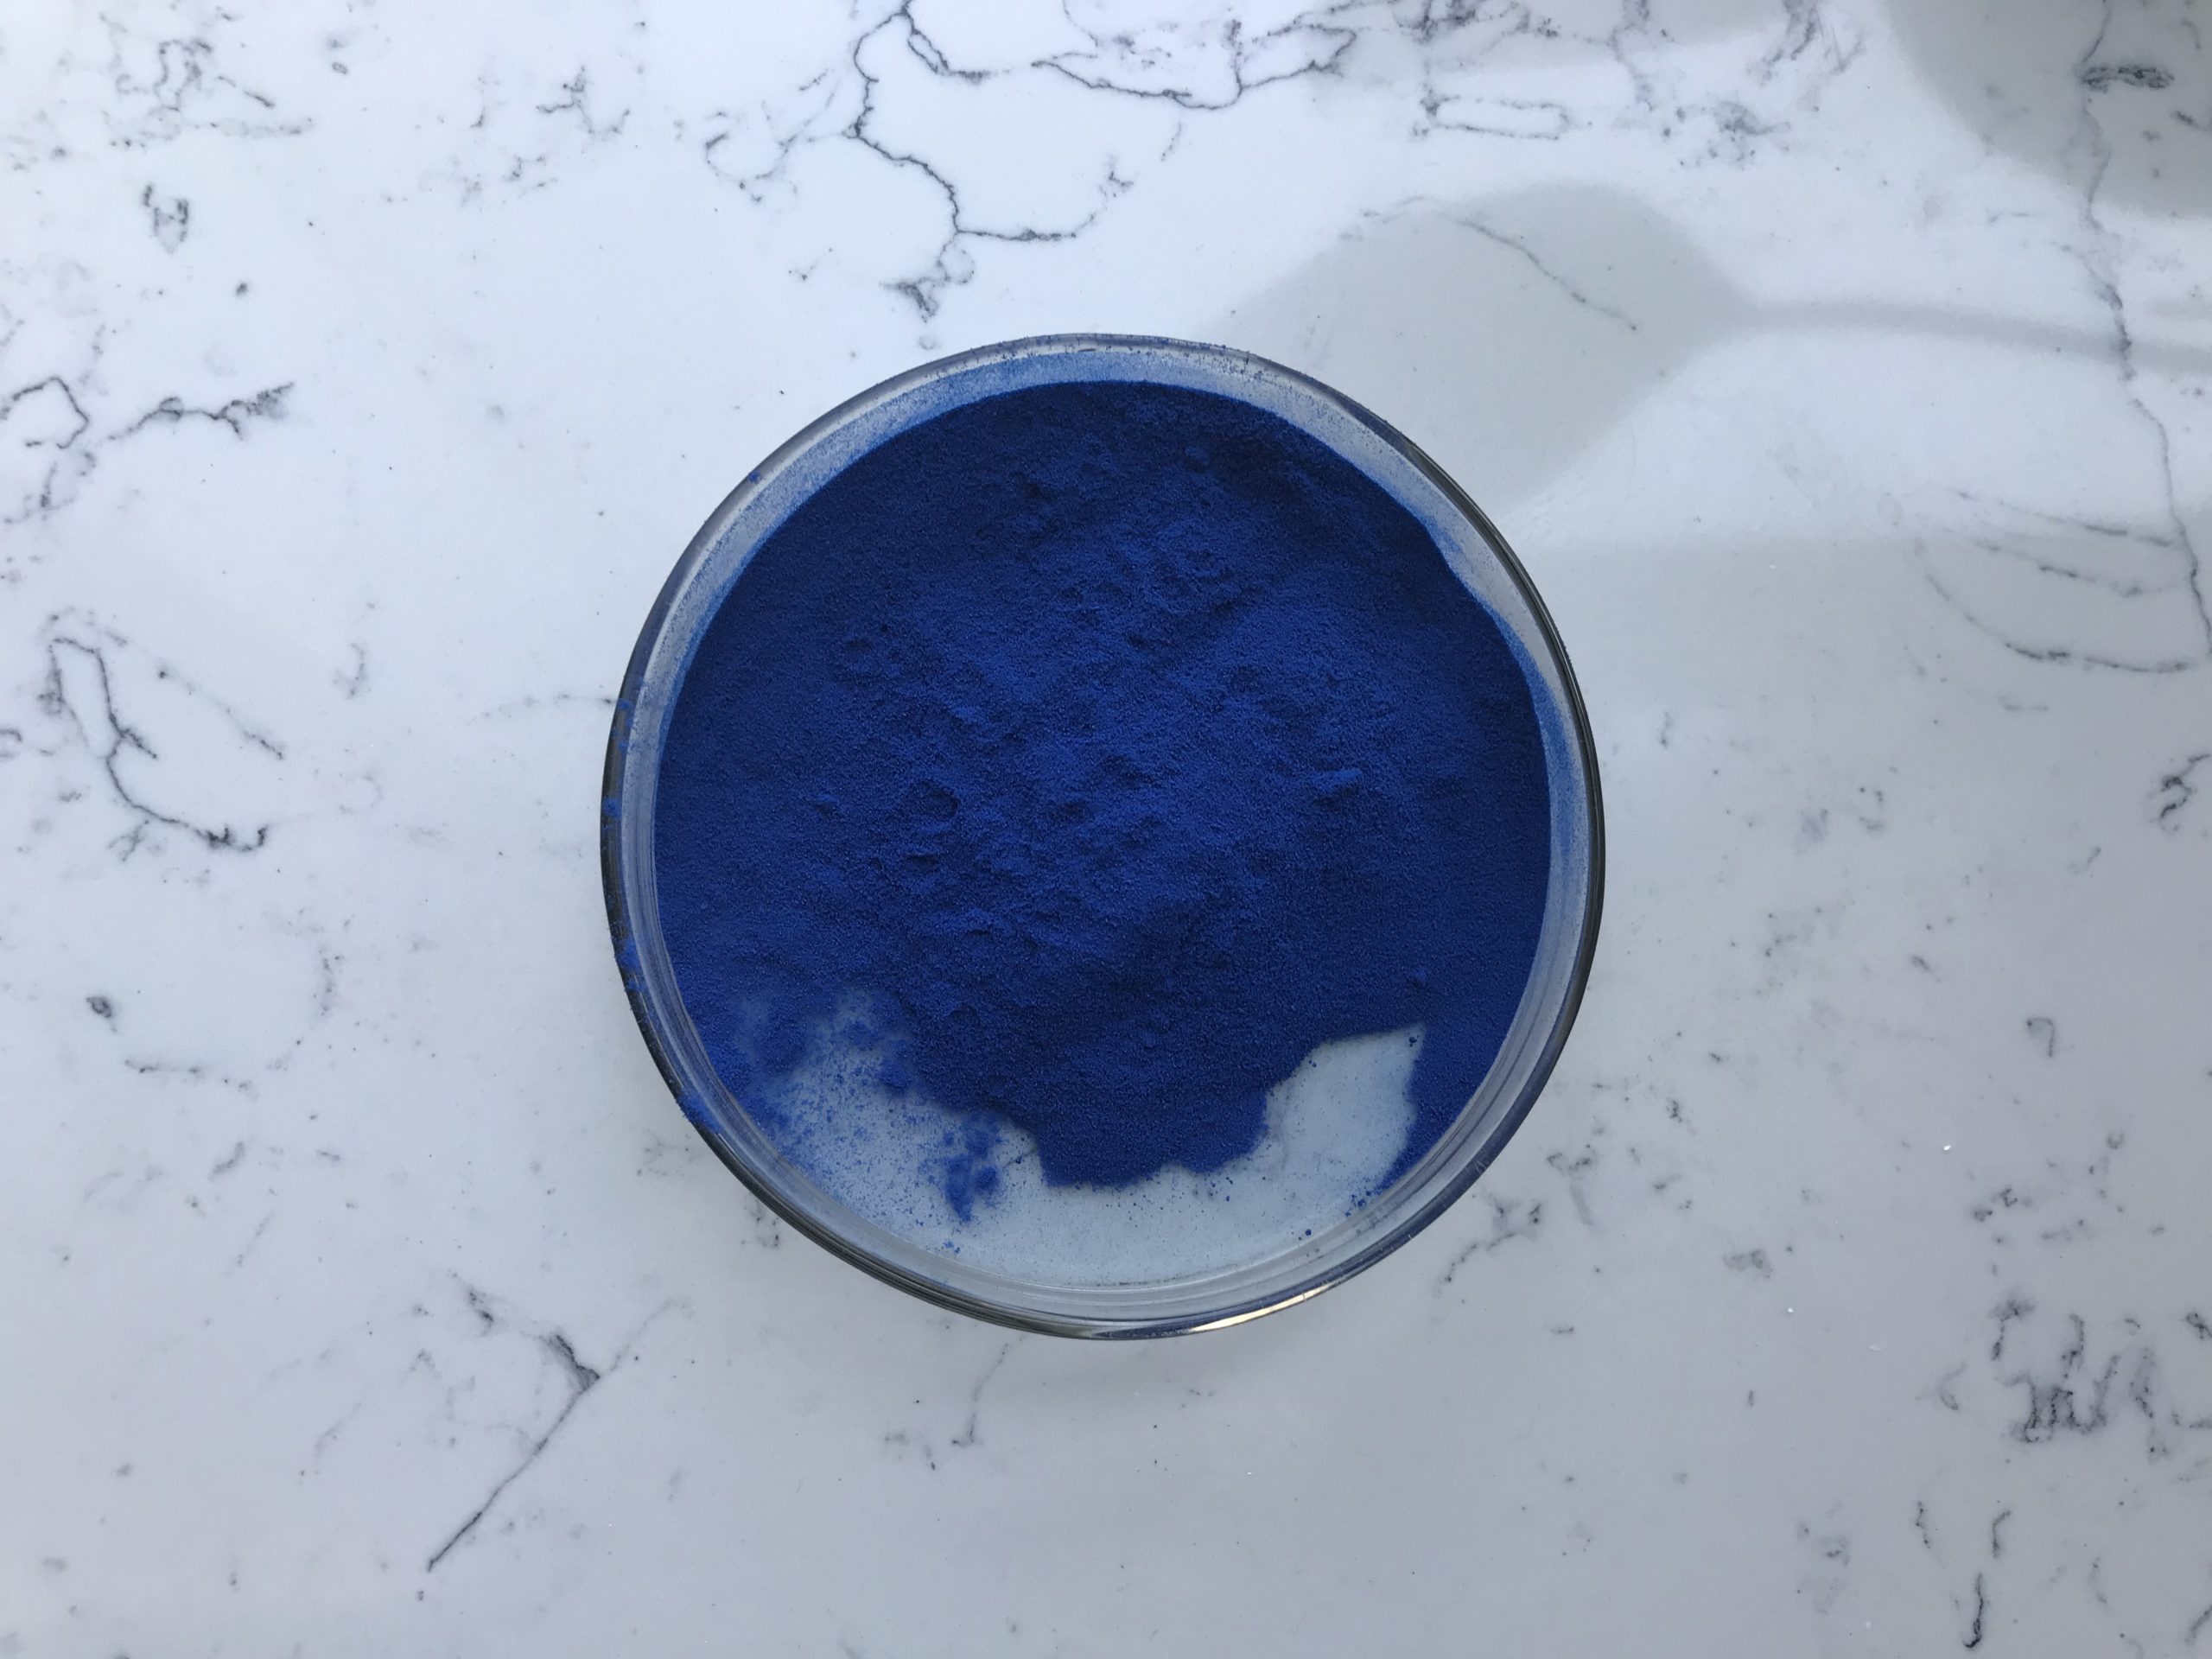 Chemical structure and physical properties of Phycocyanin-Xi'an Lyphar Biotech Co., Ltd